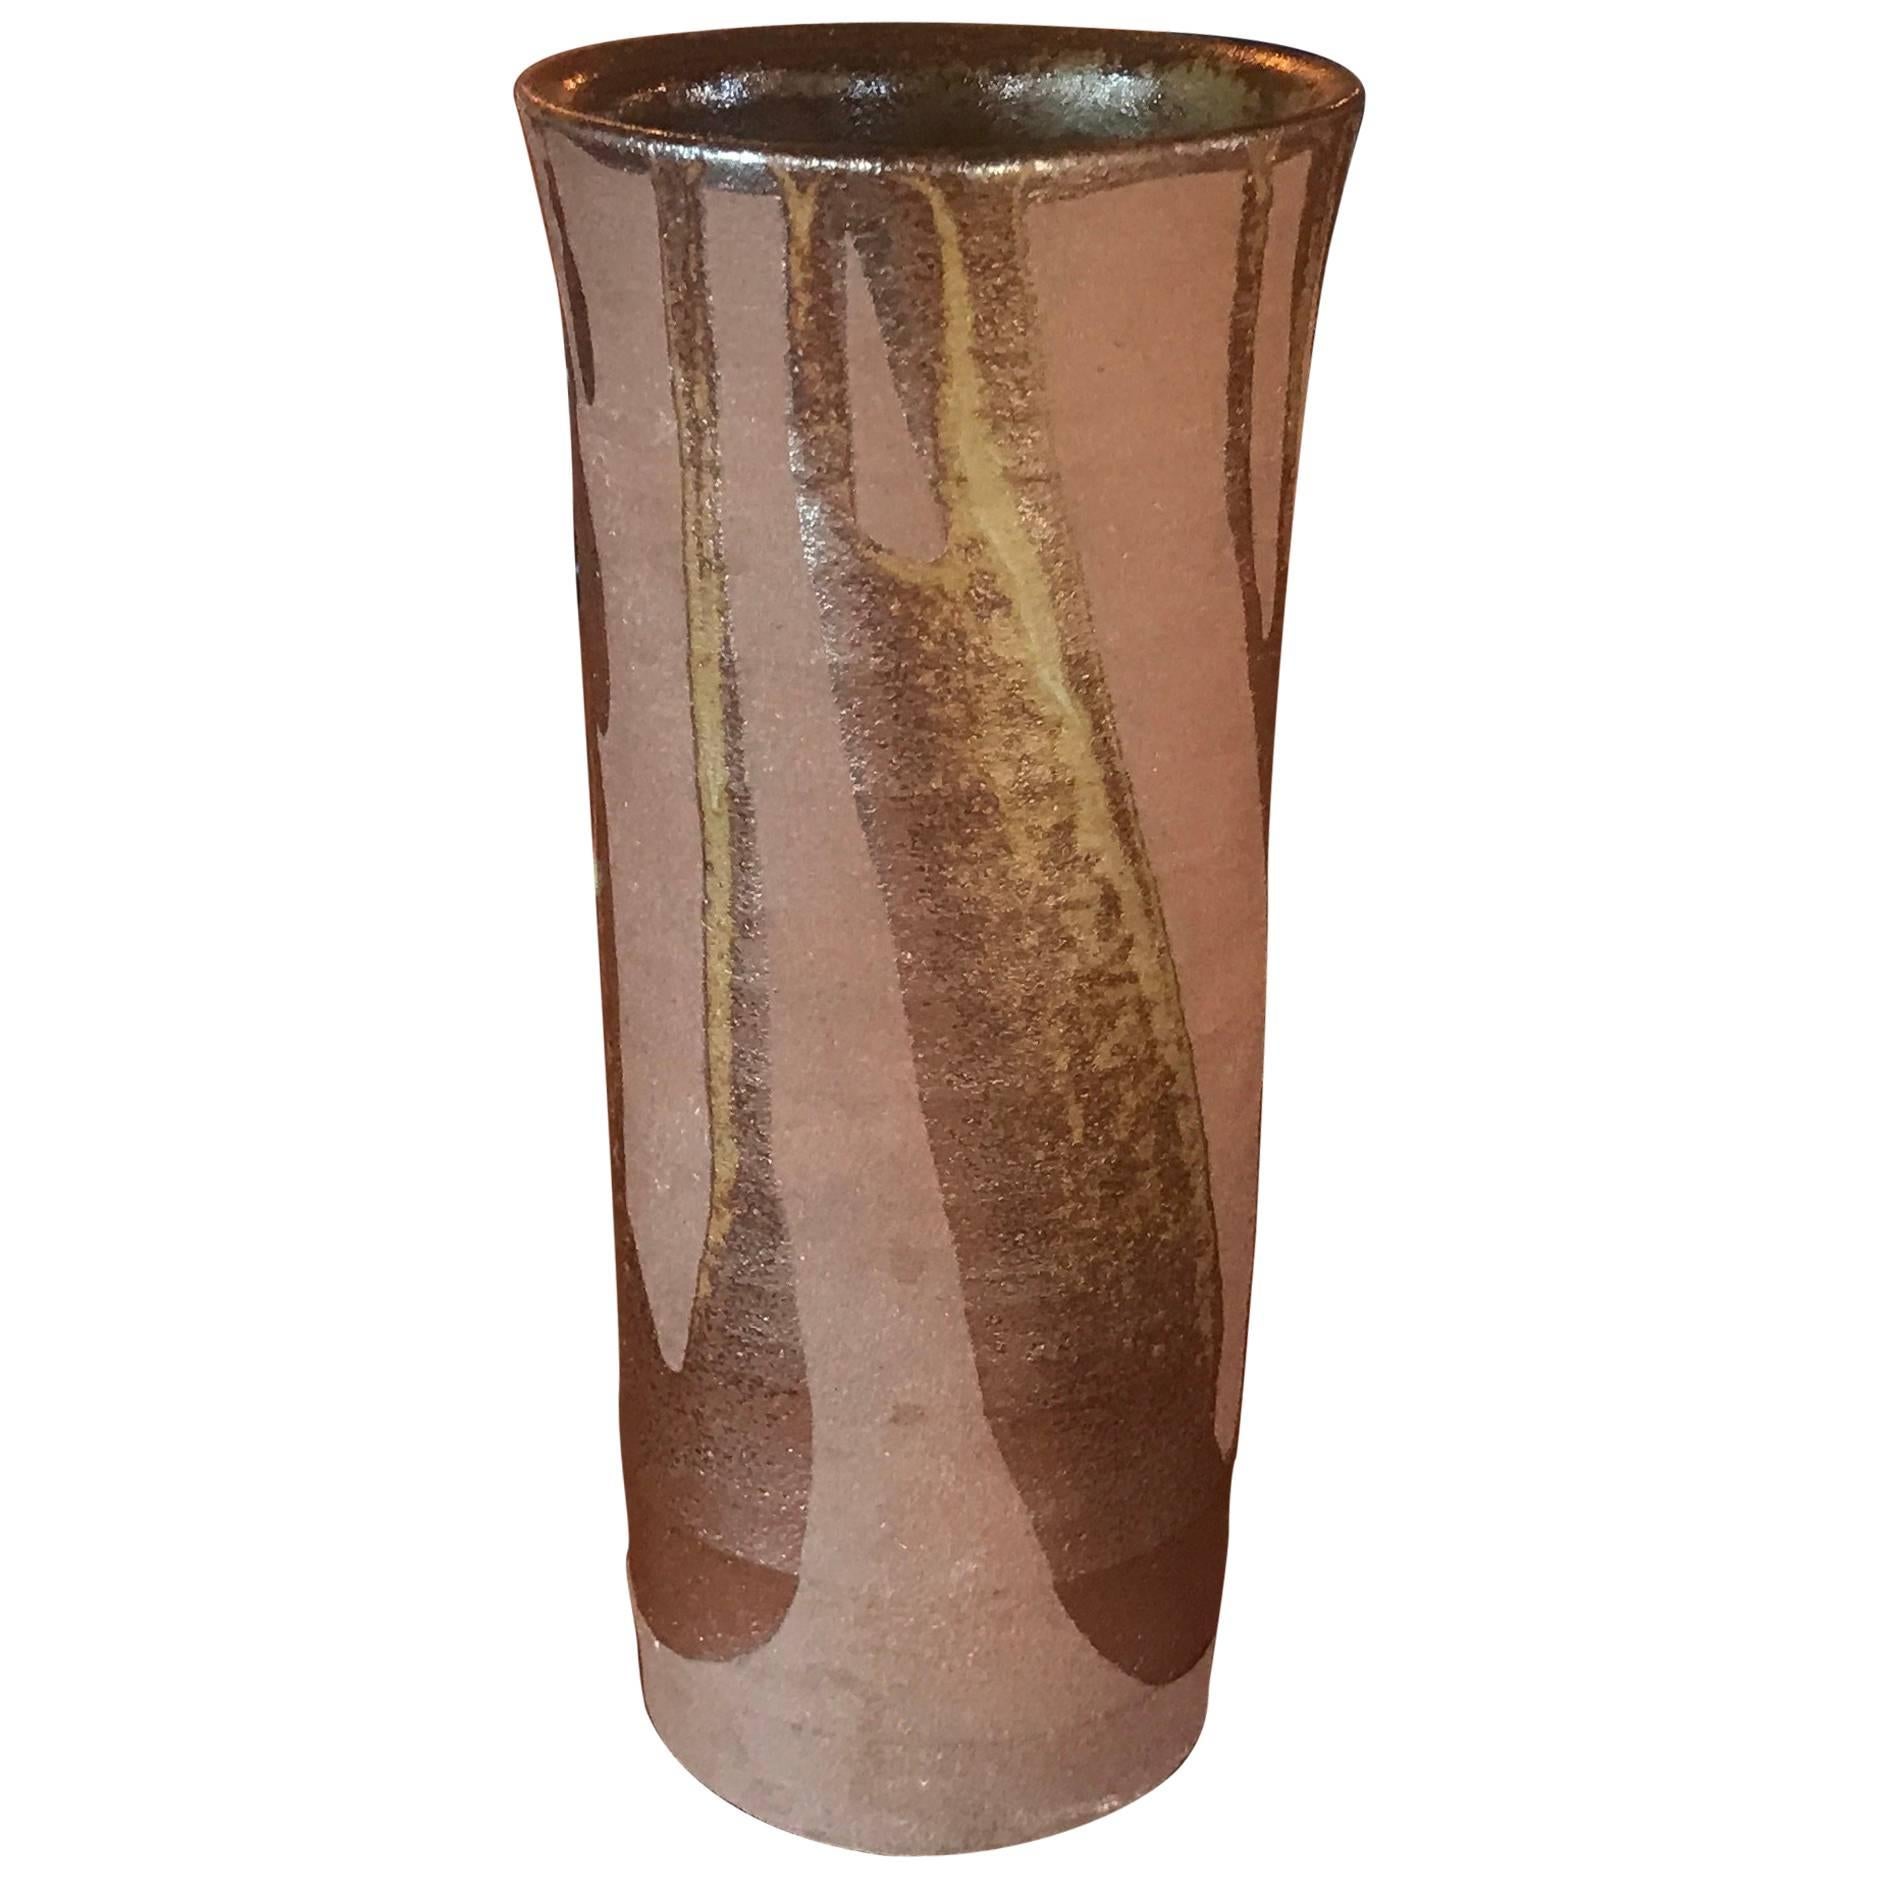 Tall Vintage Ceramic Midcentury Abstract Glazed Vase Pot Pottery Art For Sale